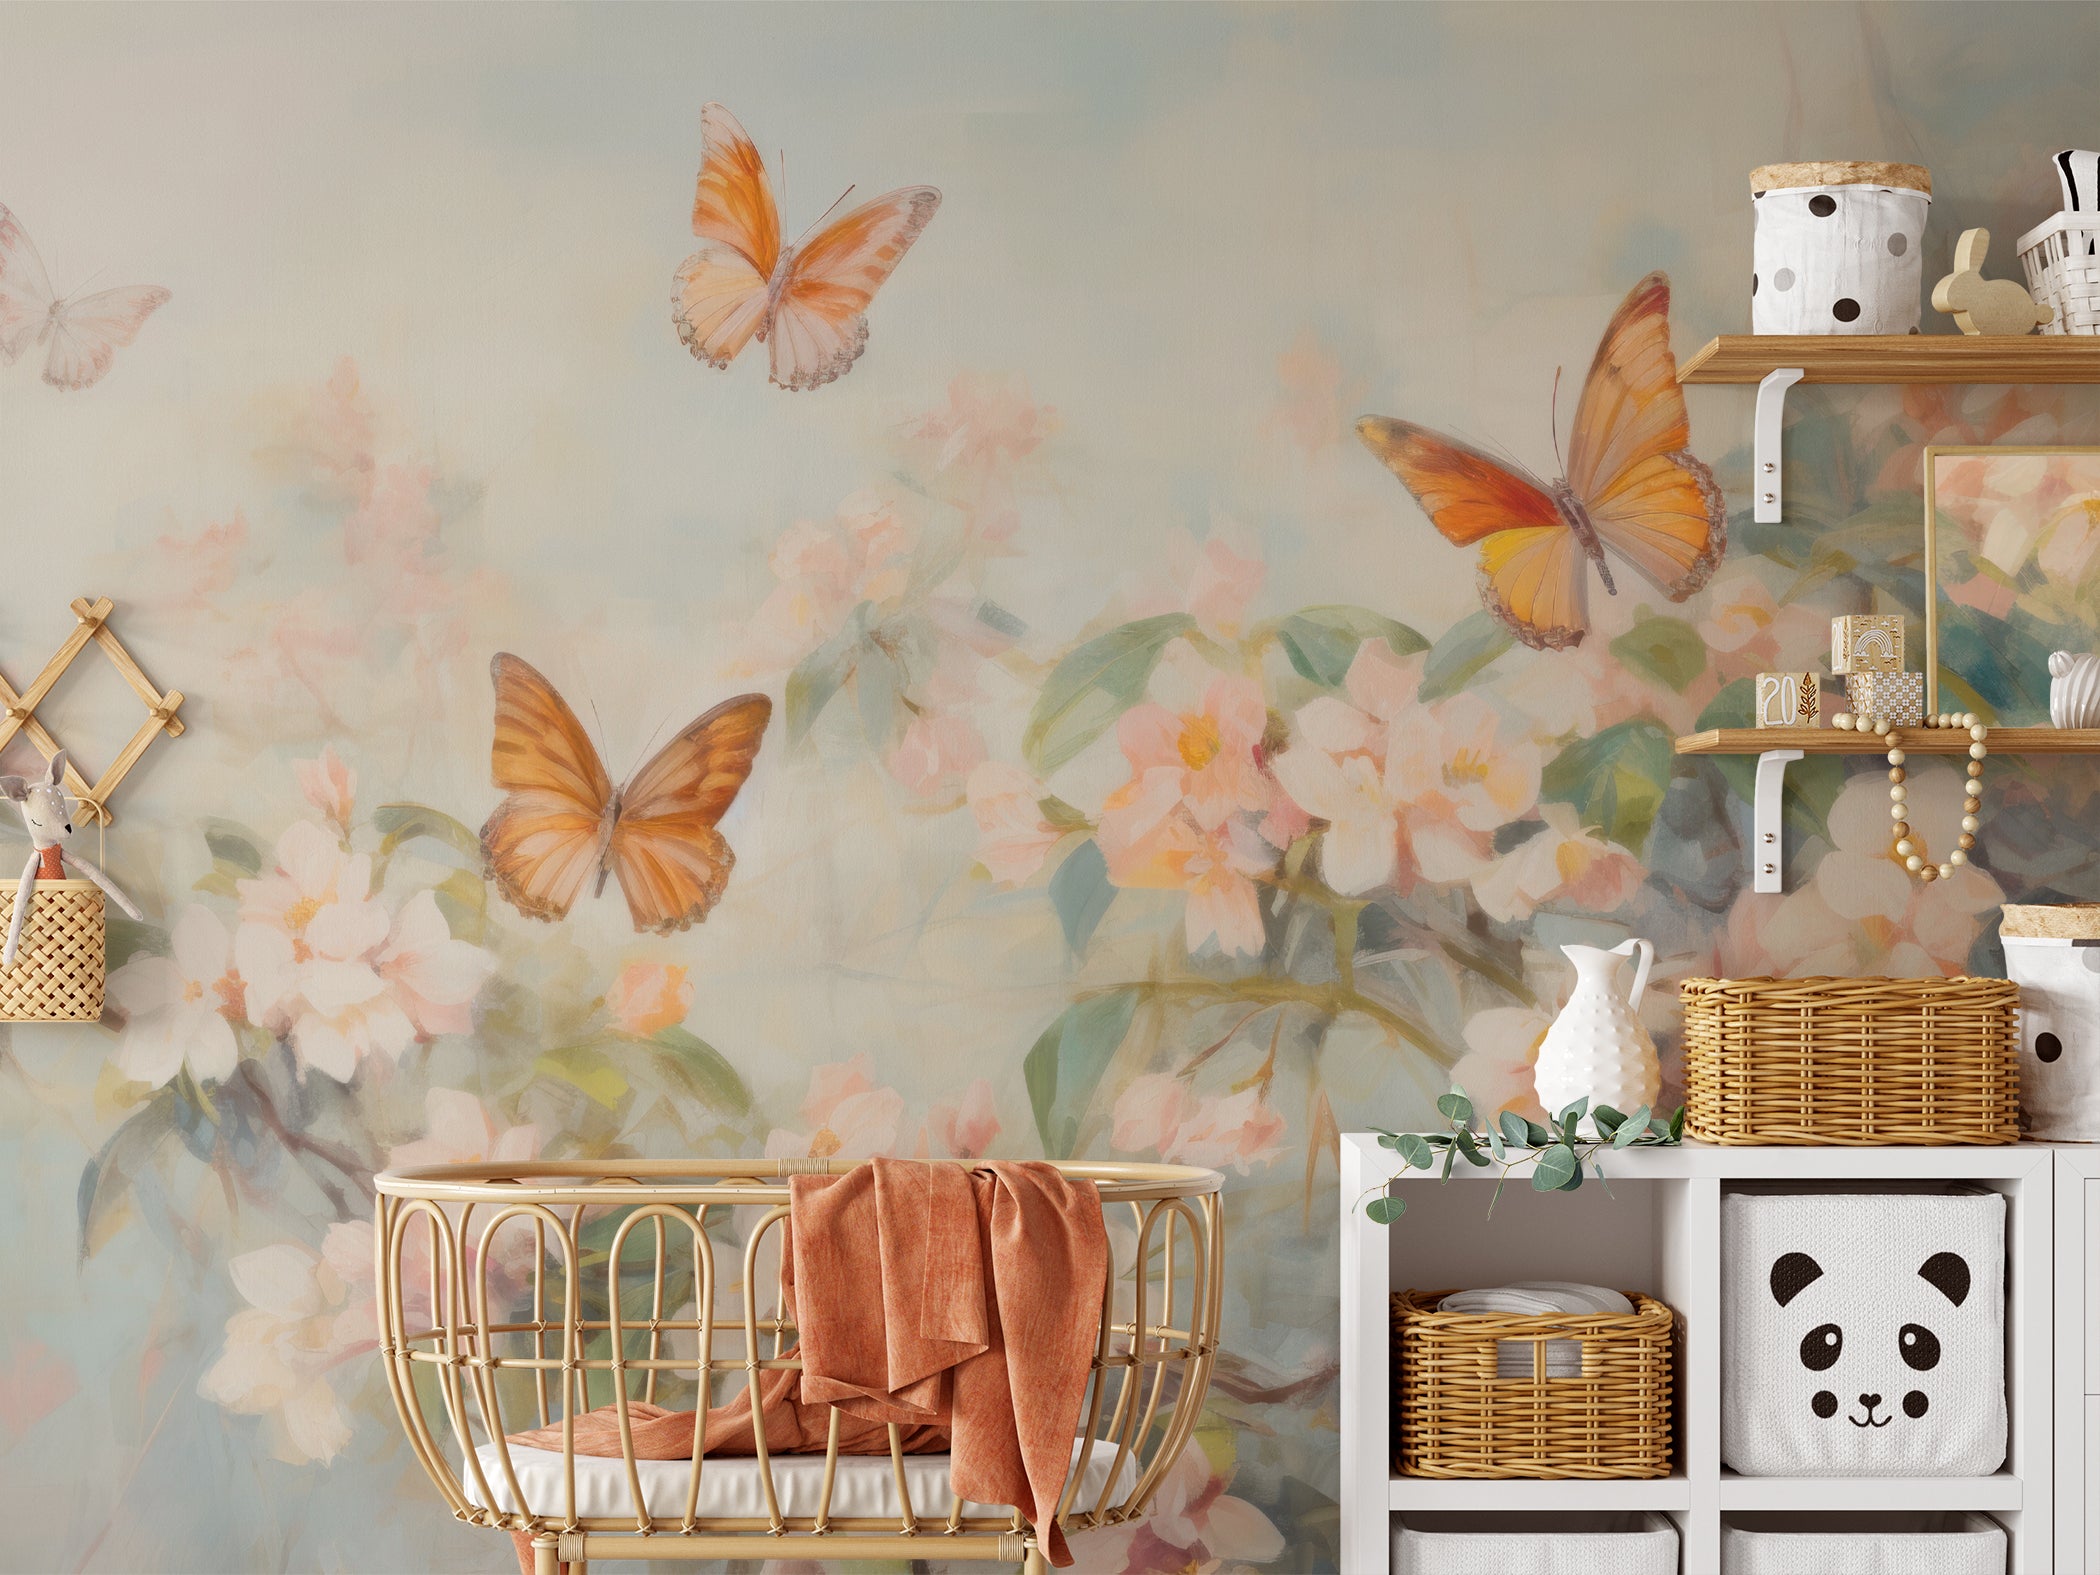 Monarch and Flowers wallpaper mural in a child's room with wooden furniture and playful decor.